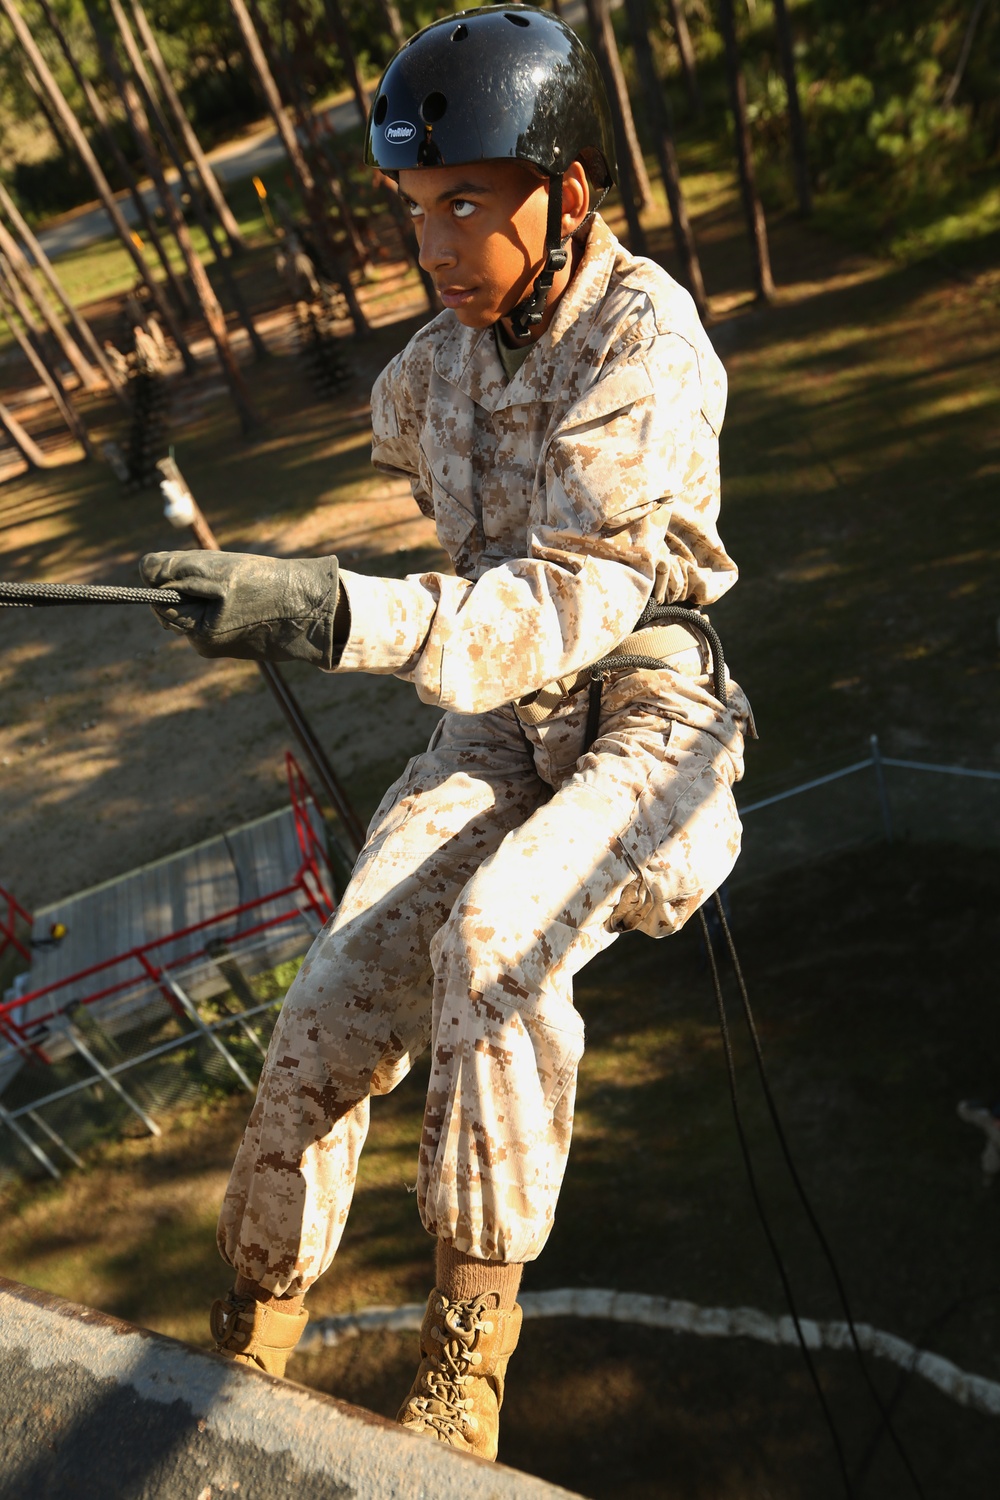 DVIDS - Images - Photo Gallery: Marine recruits gain confidence on ...